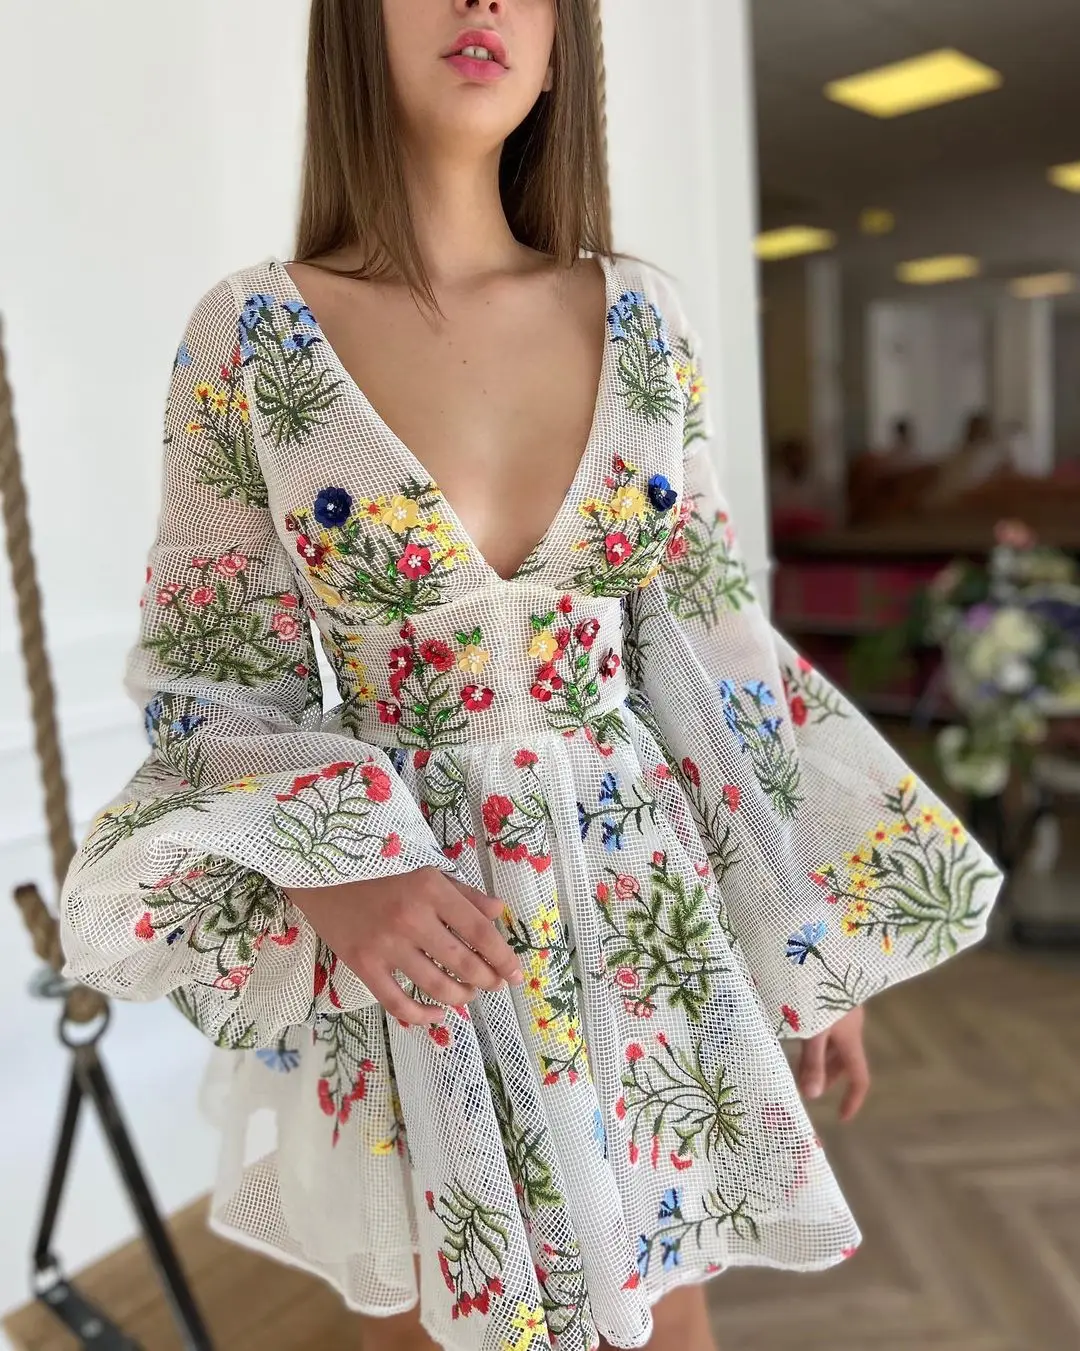 INS Hottest Women Sexy Floral Embroidery Mini Dress 2021 Summer Lady's Lantern Sleeve Deep V-neck High Waist A-line Gown Dresses